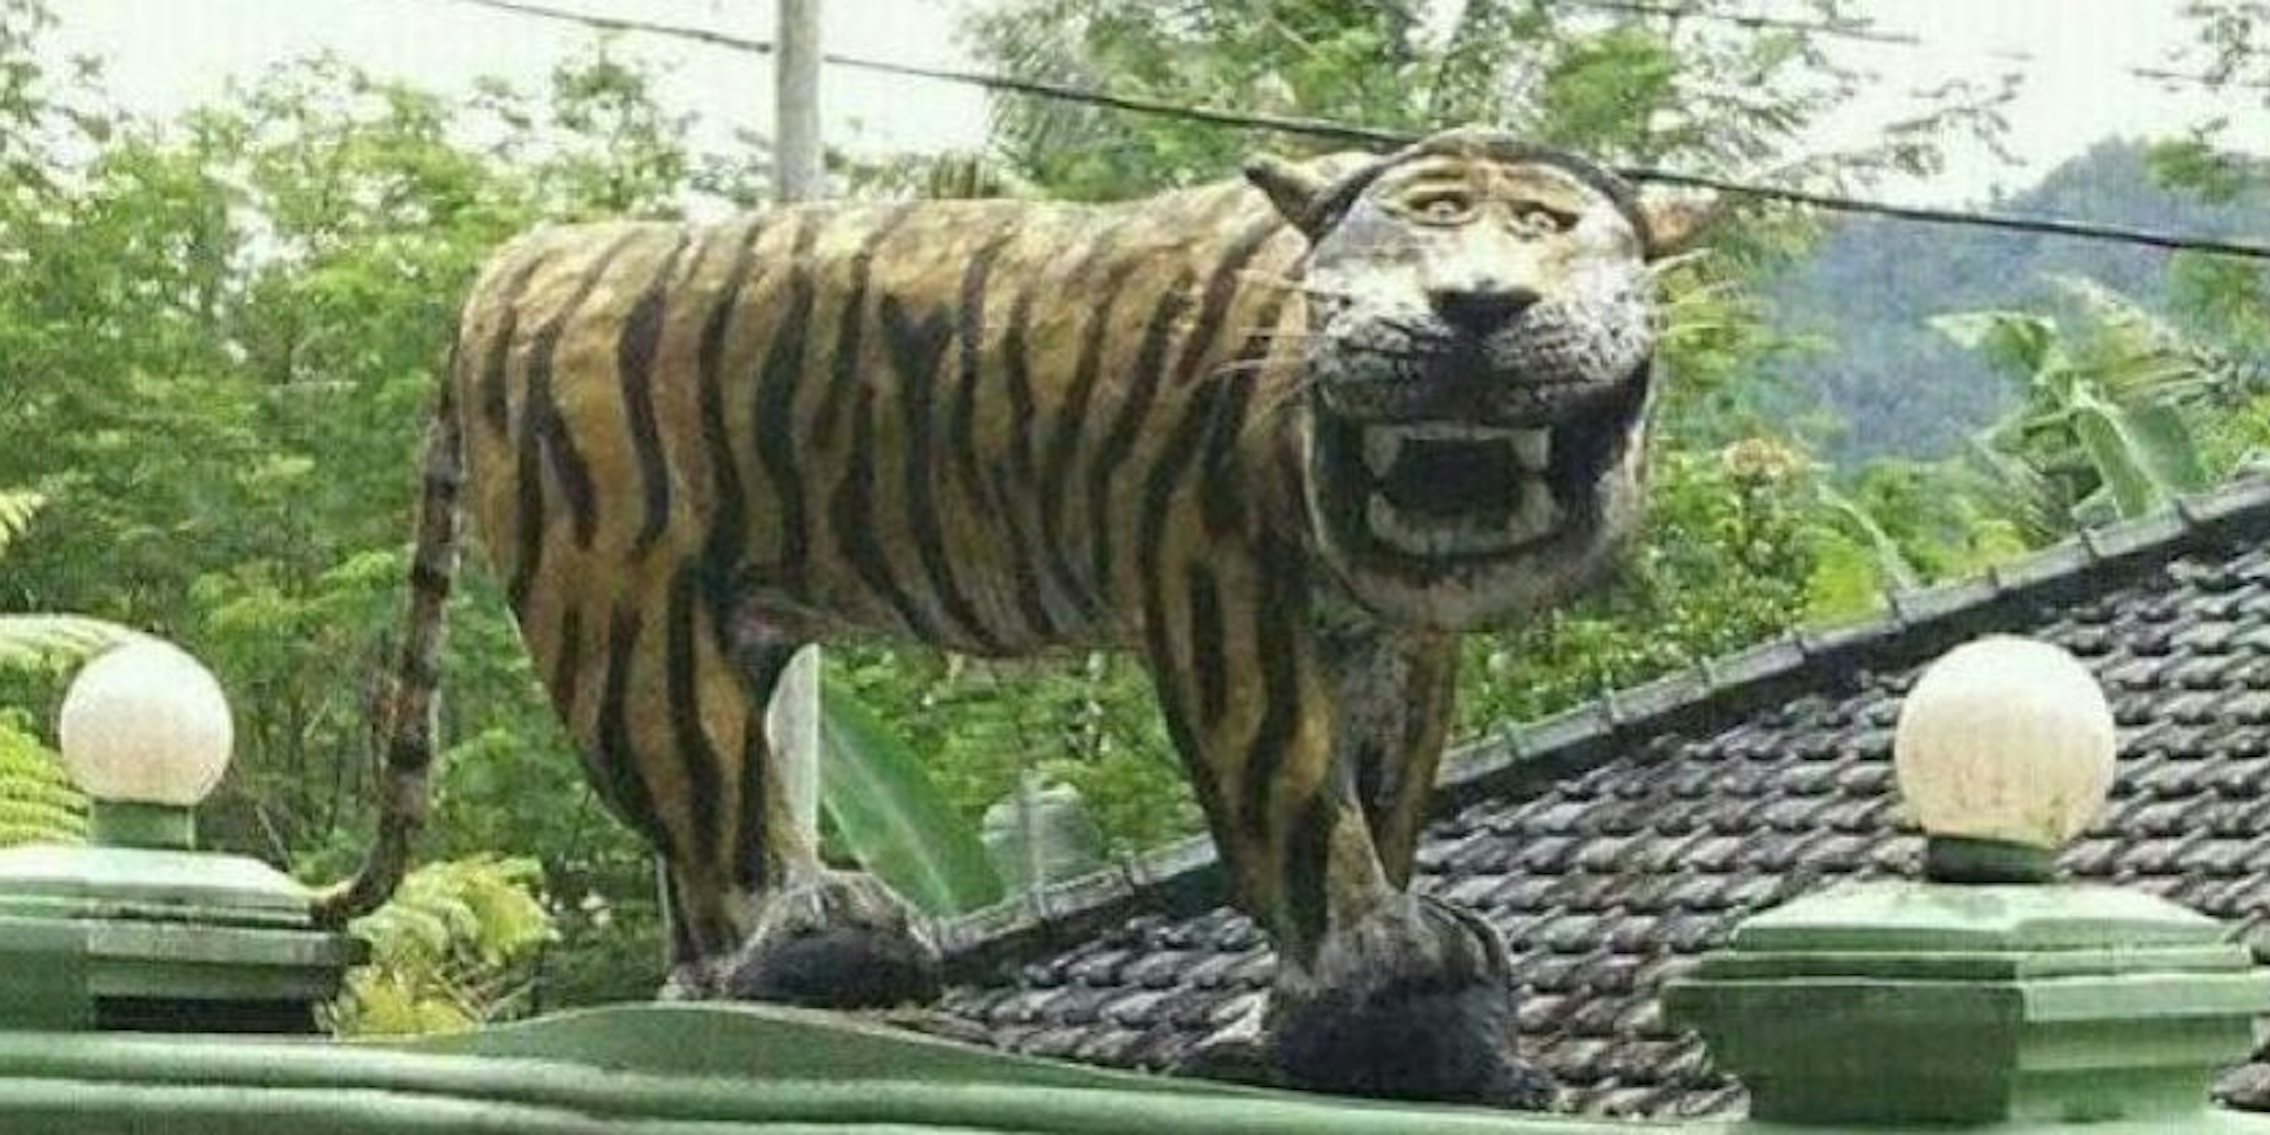 indonesian laughing tiger statue